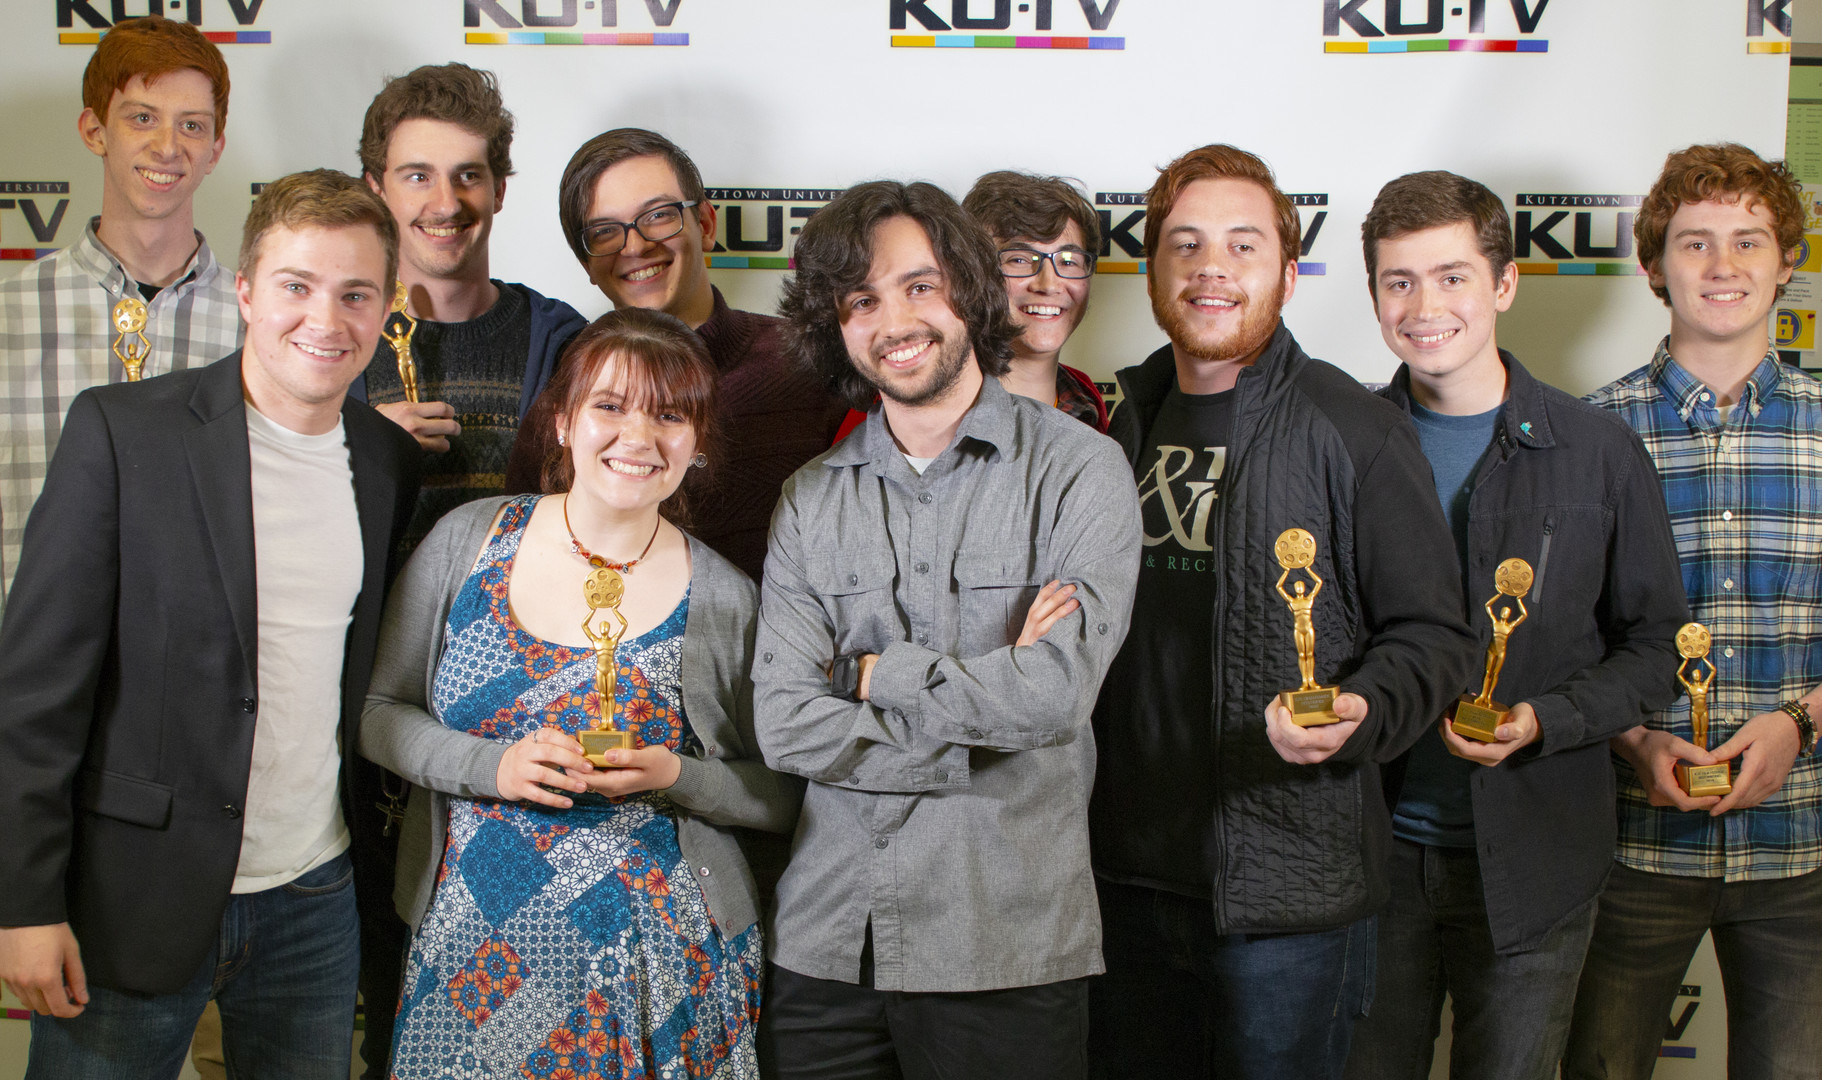 Kutztown University Film Festival group holding up their awards and smiling together in front of KUTV wallpaper 